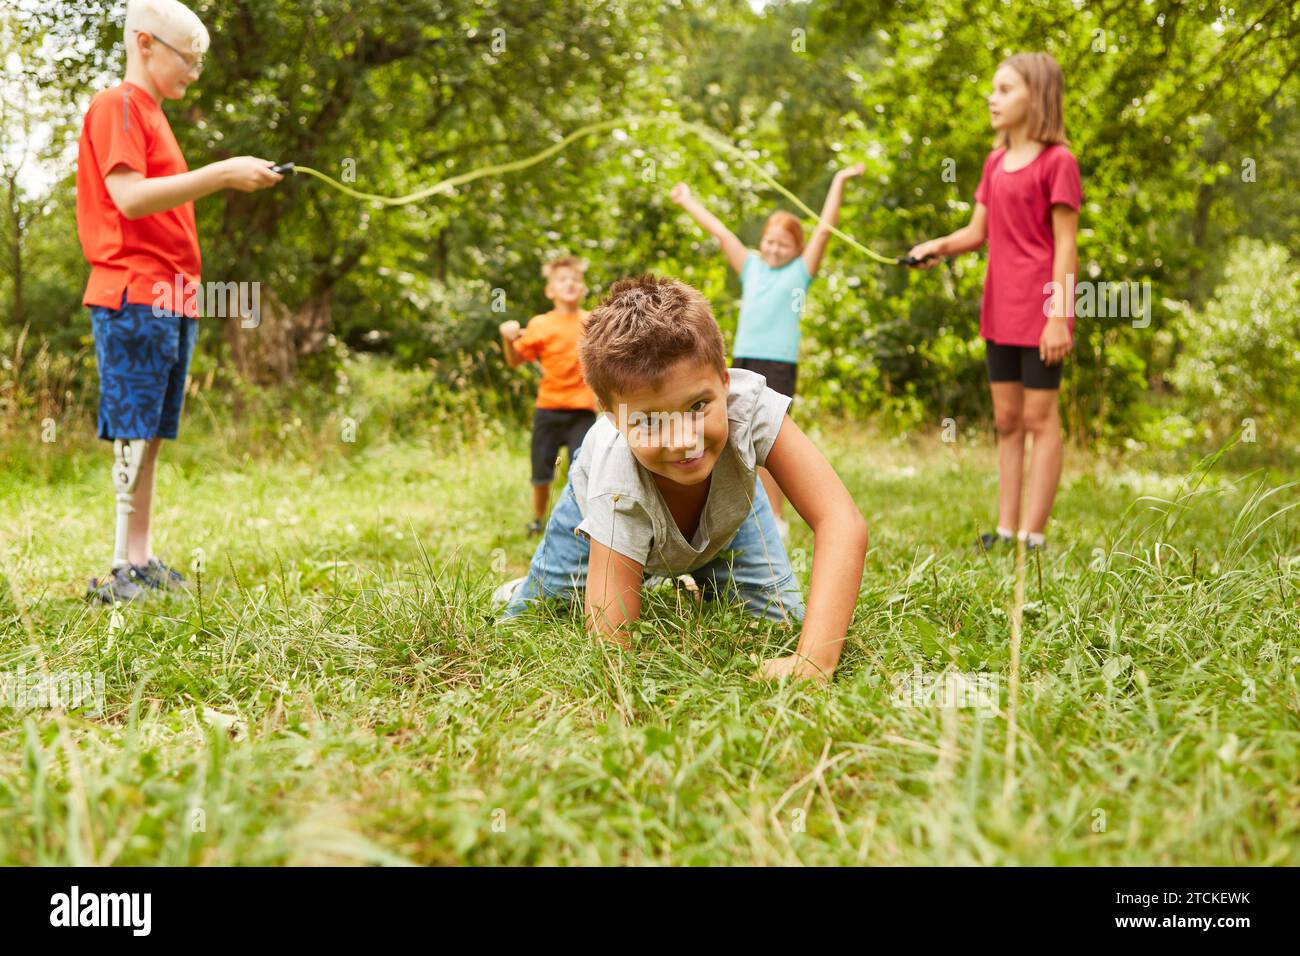 Portrait of boy crawling on grass with friends playing in background at park Stock Photo